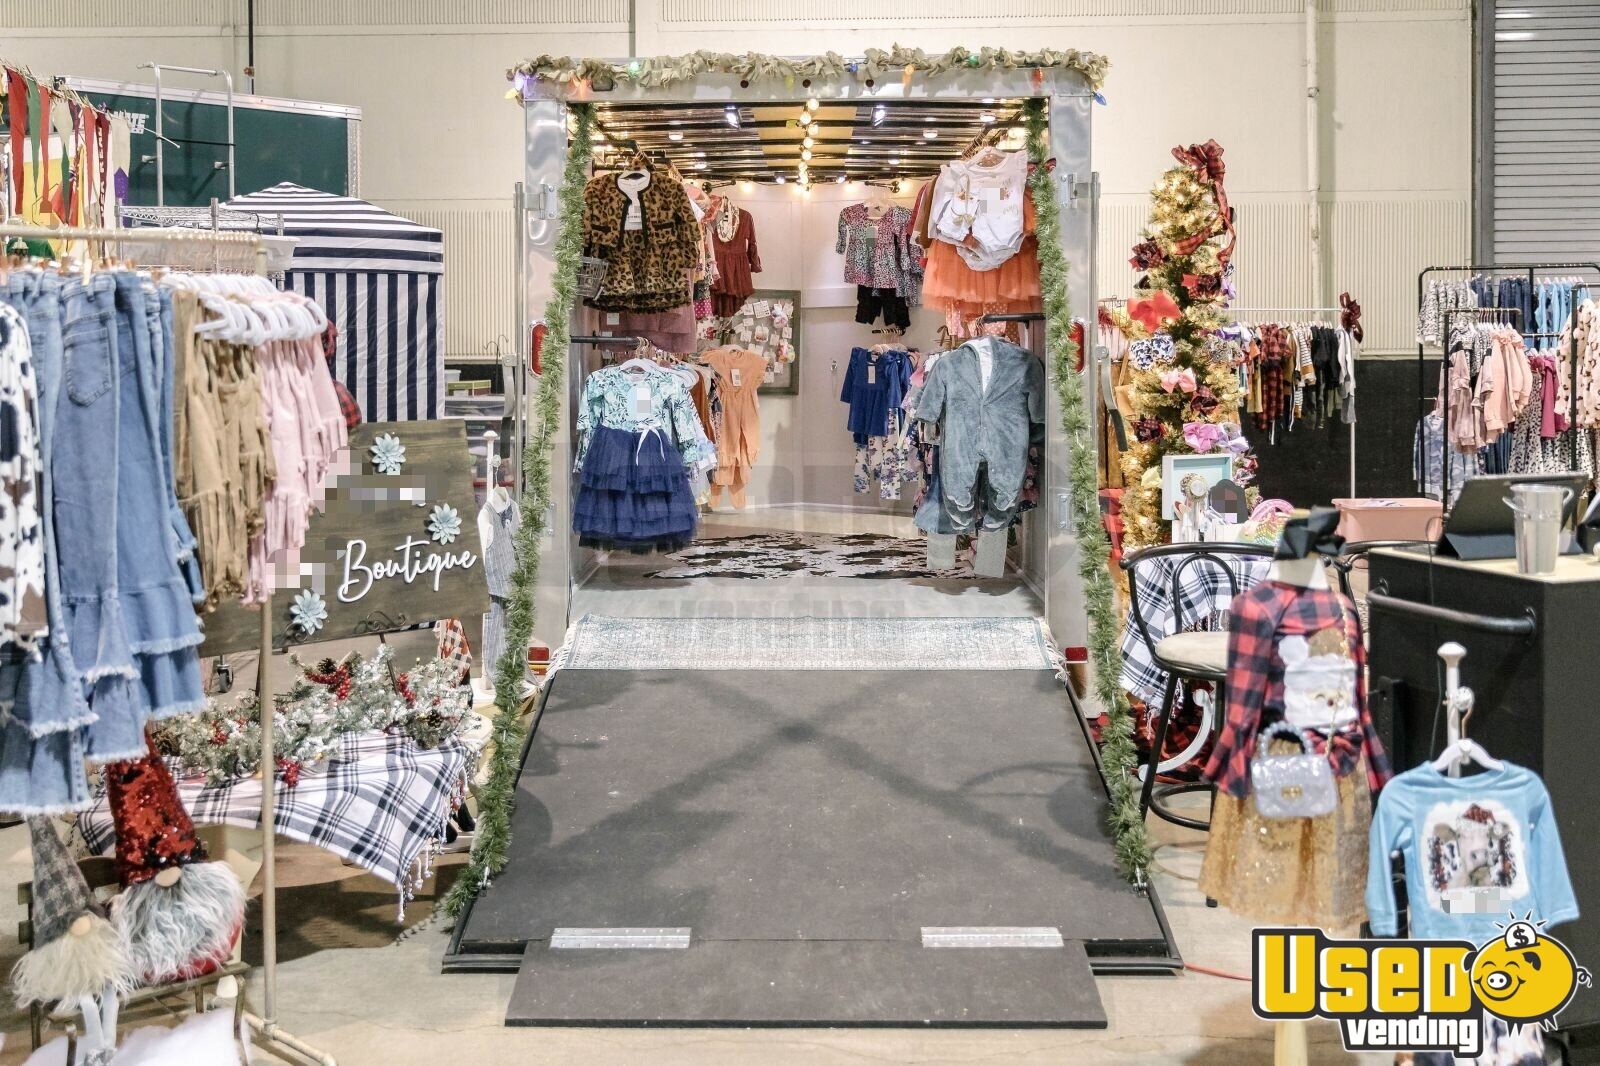 2019 6' x 12' Mobile Children's Clothing Boutique  Trailer Pop-Up Shop w/  Inventory for Sale in North Carolina